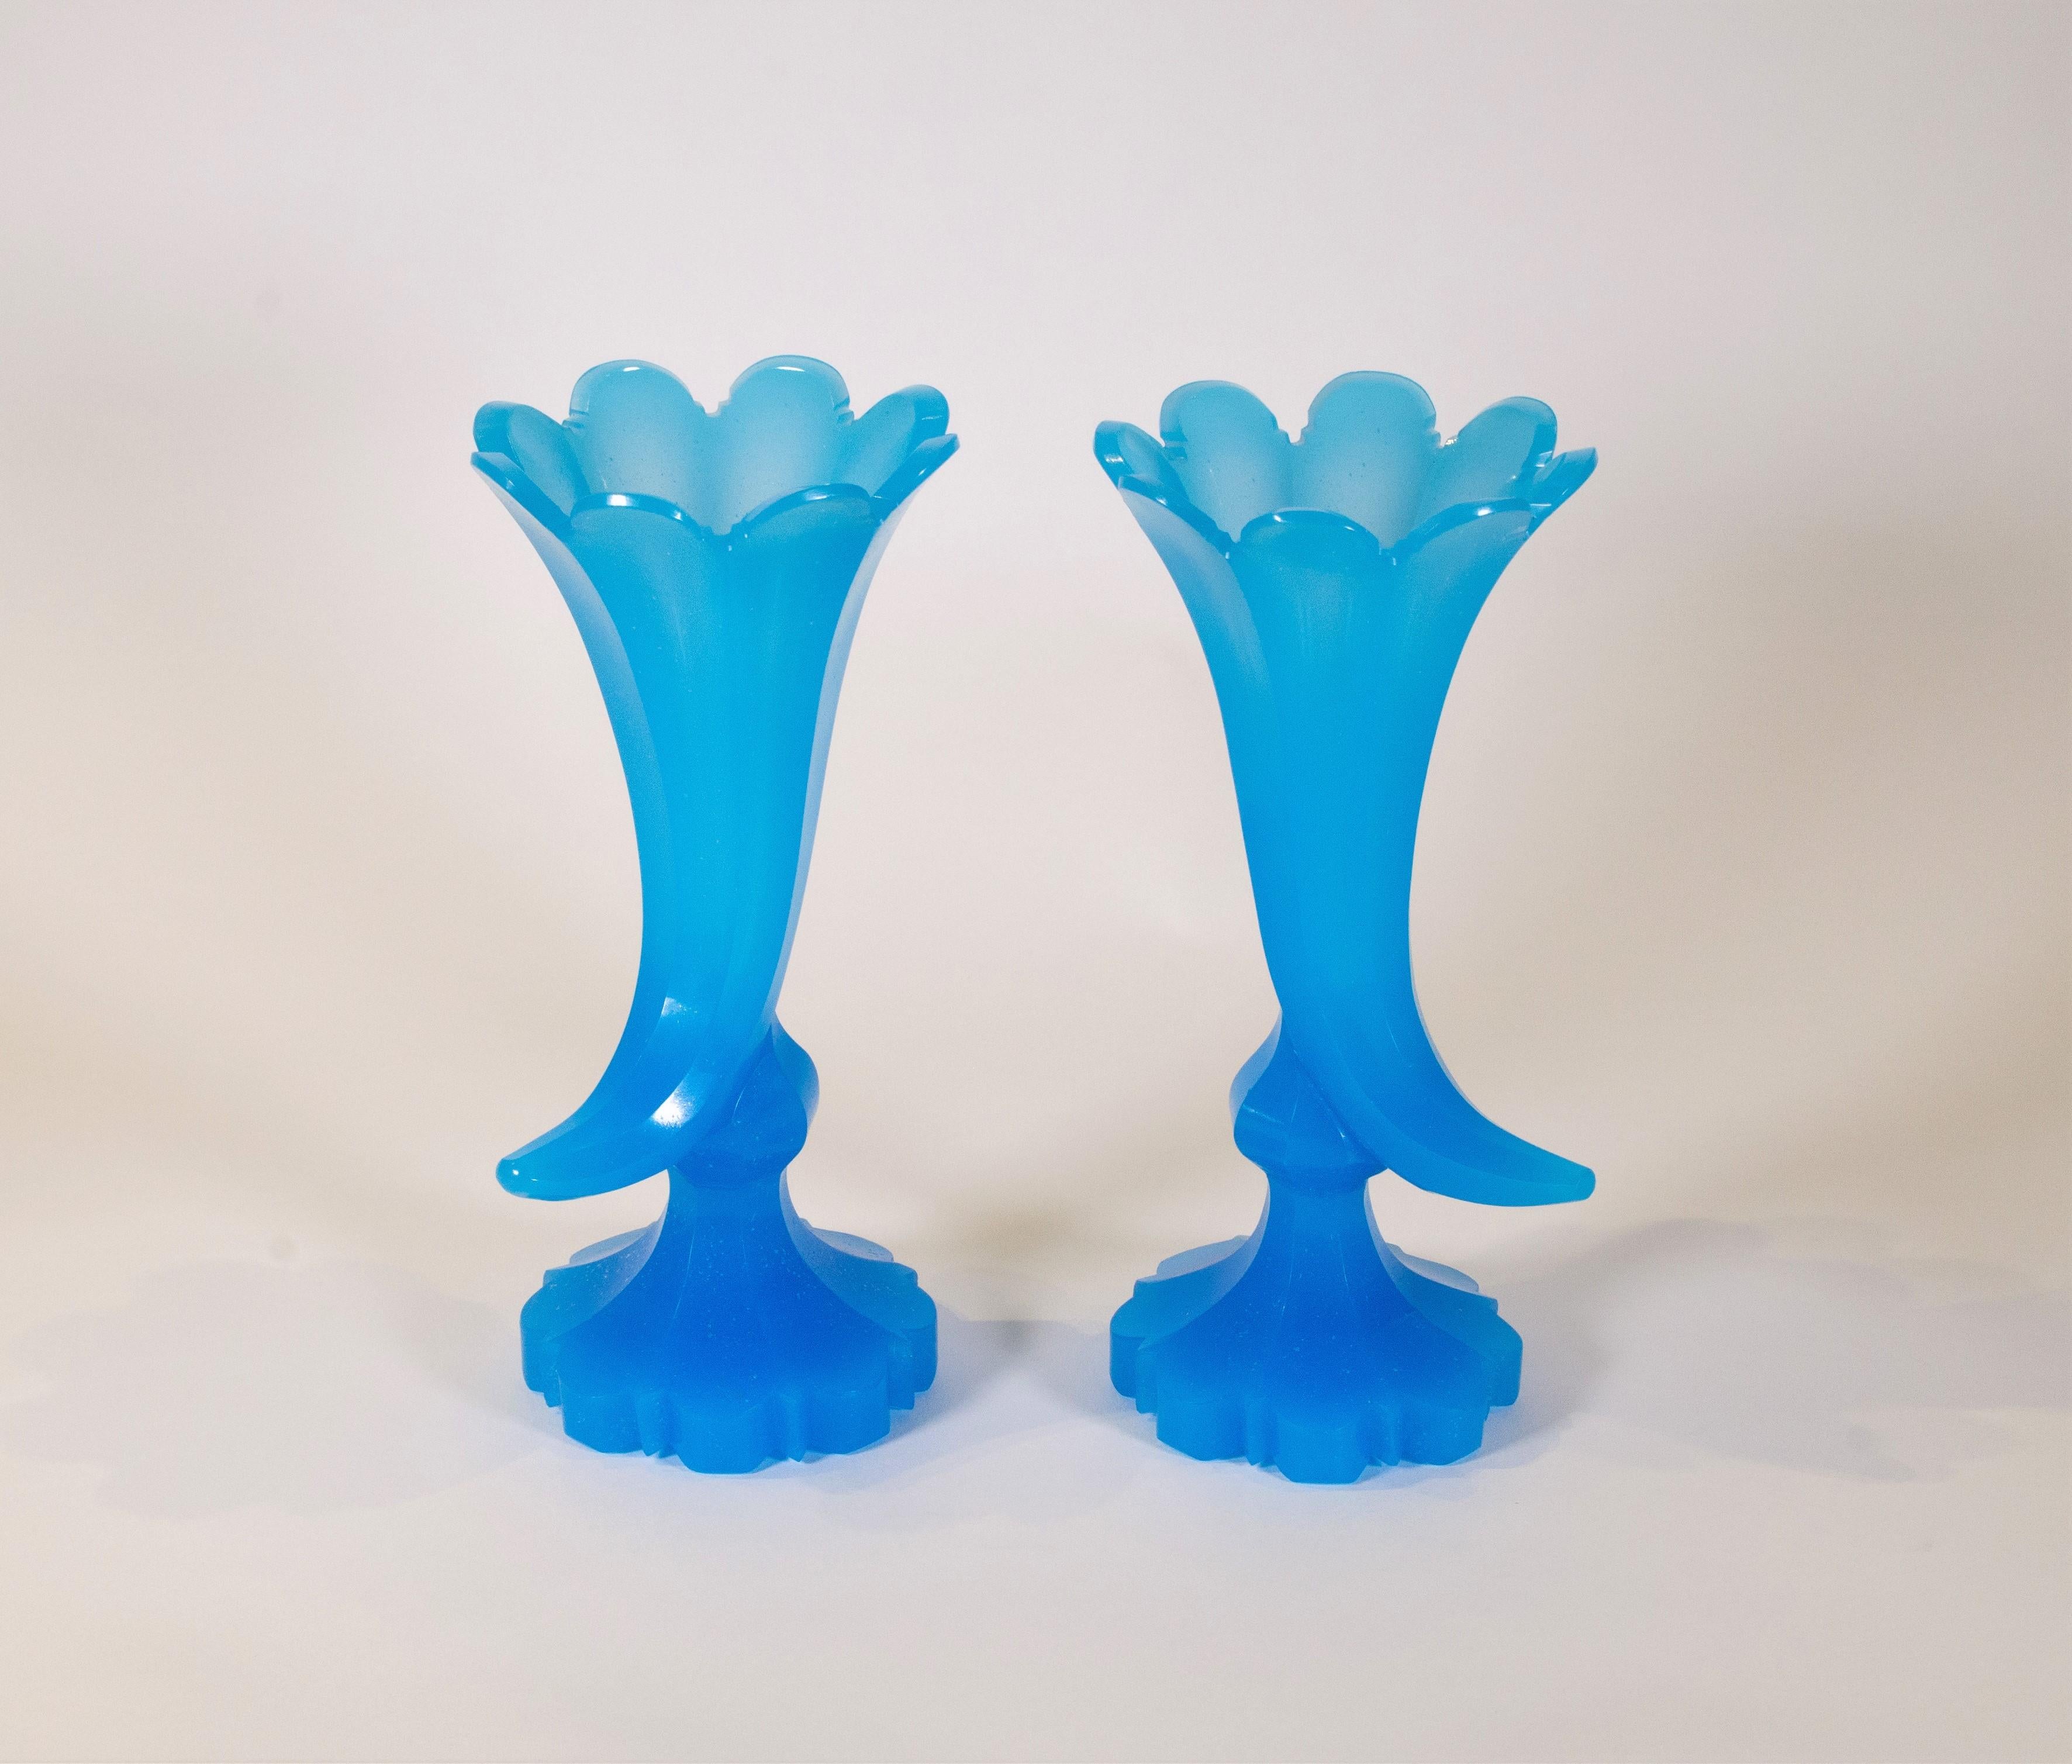 A fine pair of antique baccarat blue opaline cornucopia shaped vases on blue opaline crystal plinths. Each vase is hand-faceted and handcut with extreme precision and exceptional craftsmanship. The translucent blue opaline hue is truly beautiful and